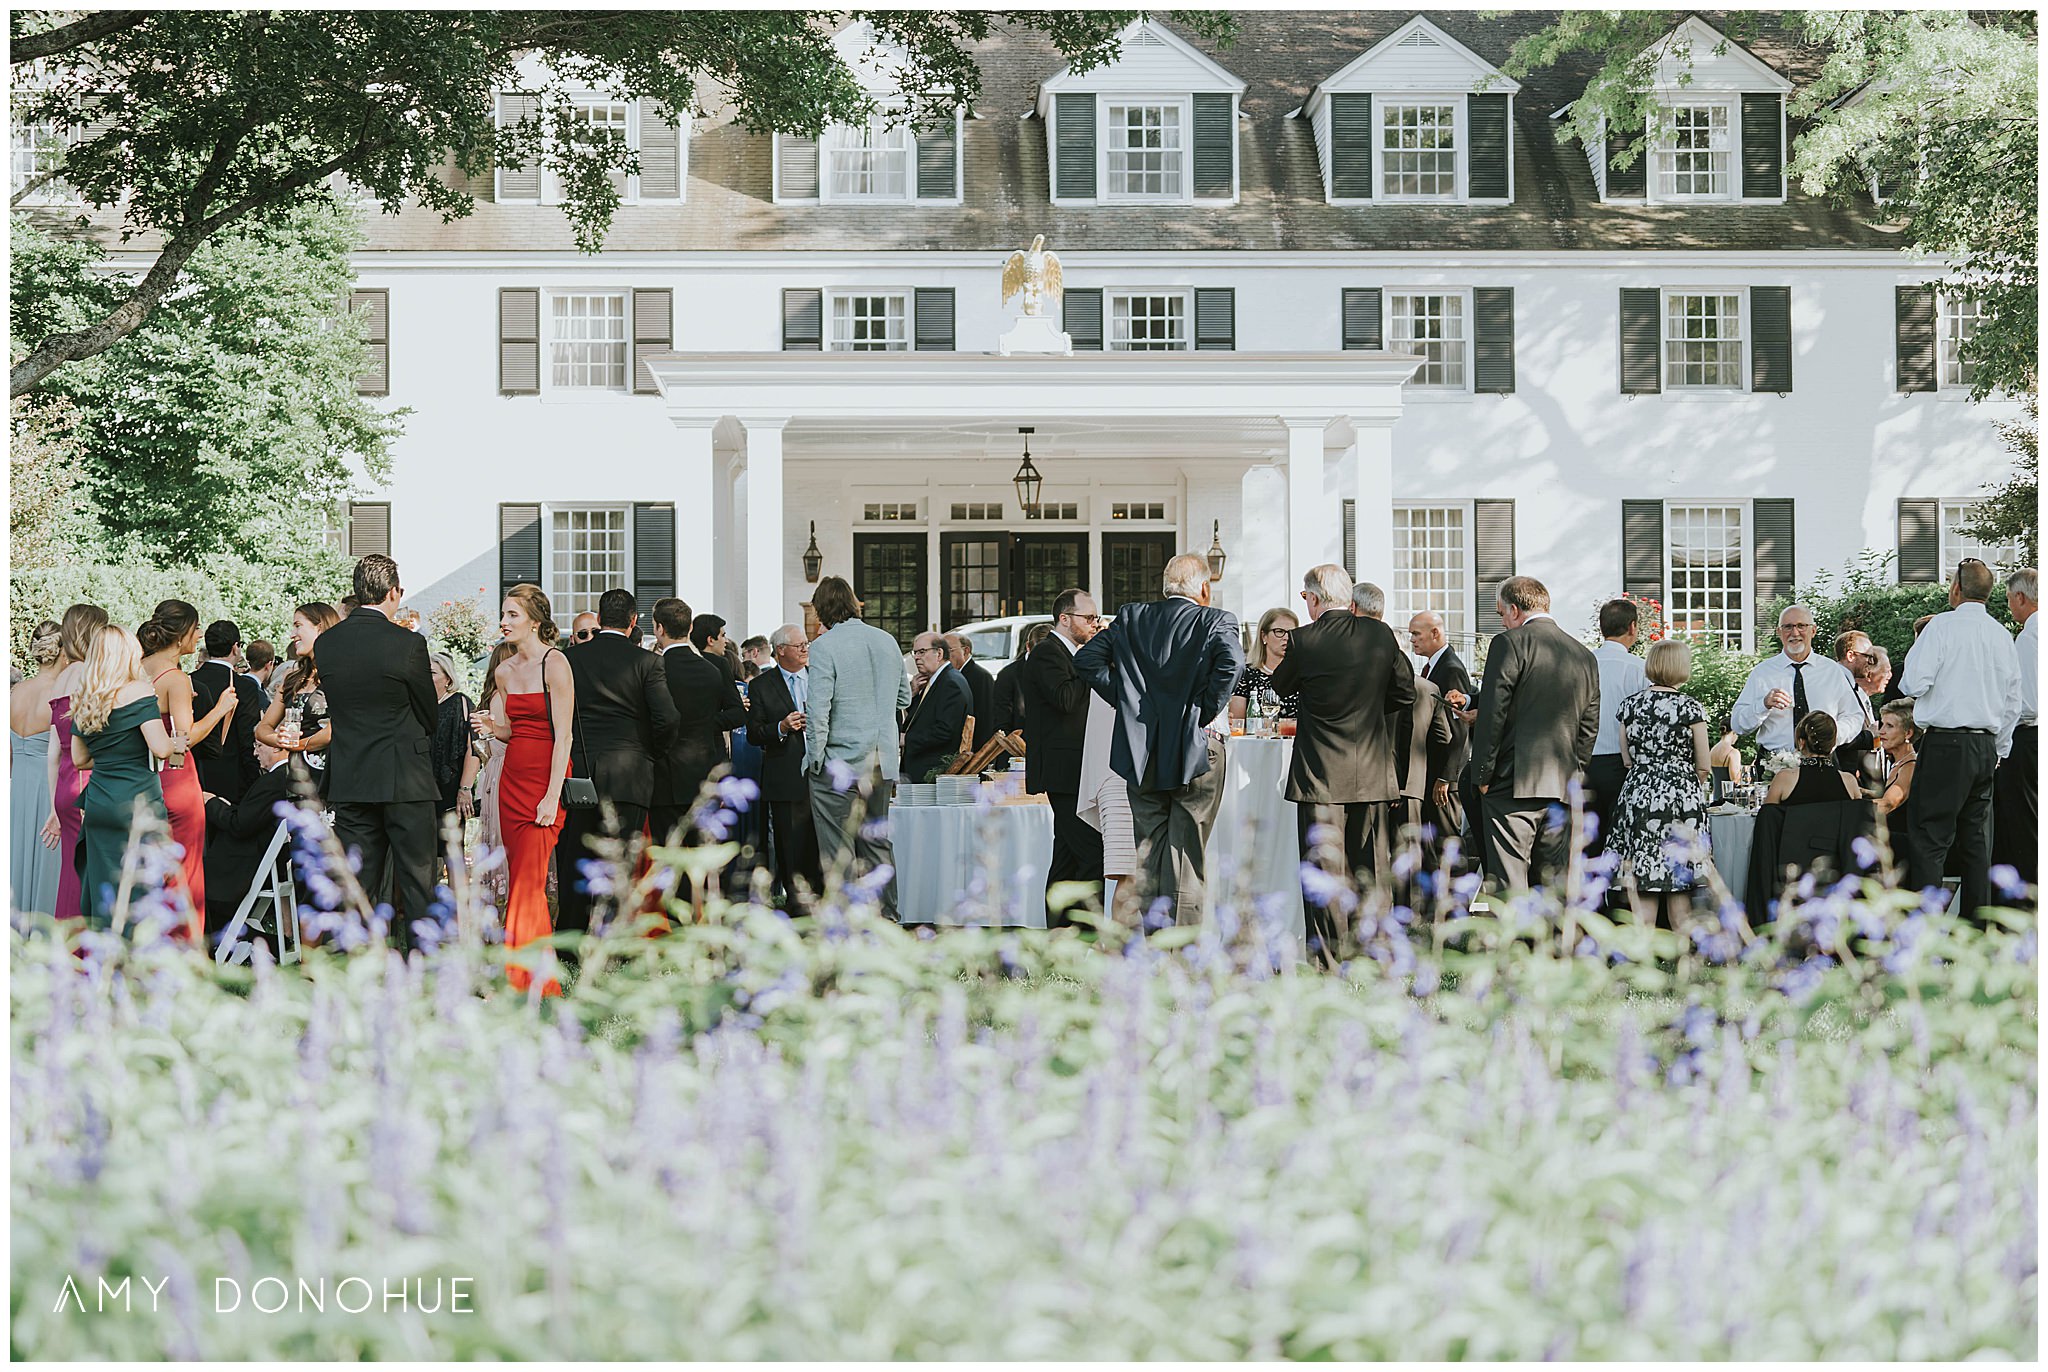 Cocktails on the Front Lawn of the Woodstock Inn & Resort | Vermont Wedding Photographer | Woodstock Inn & Resort | © Amy Donohue Photography